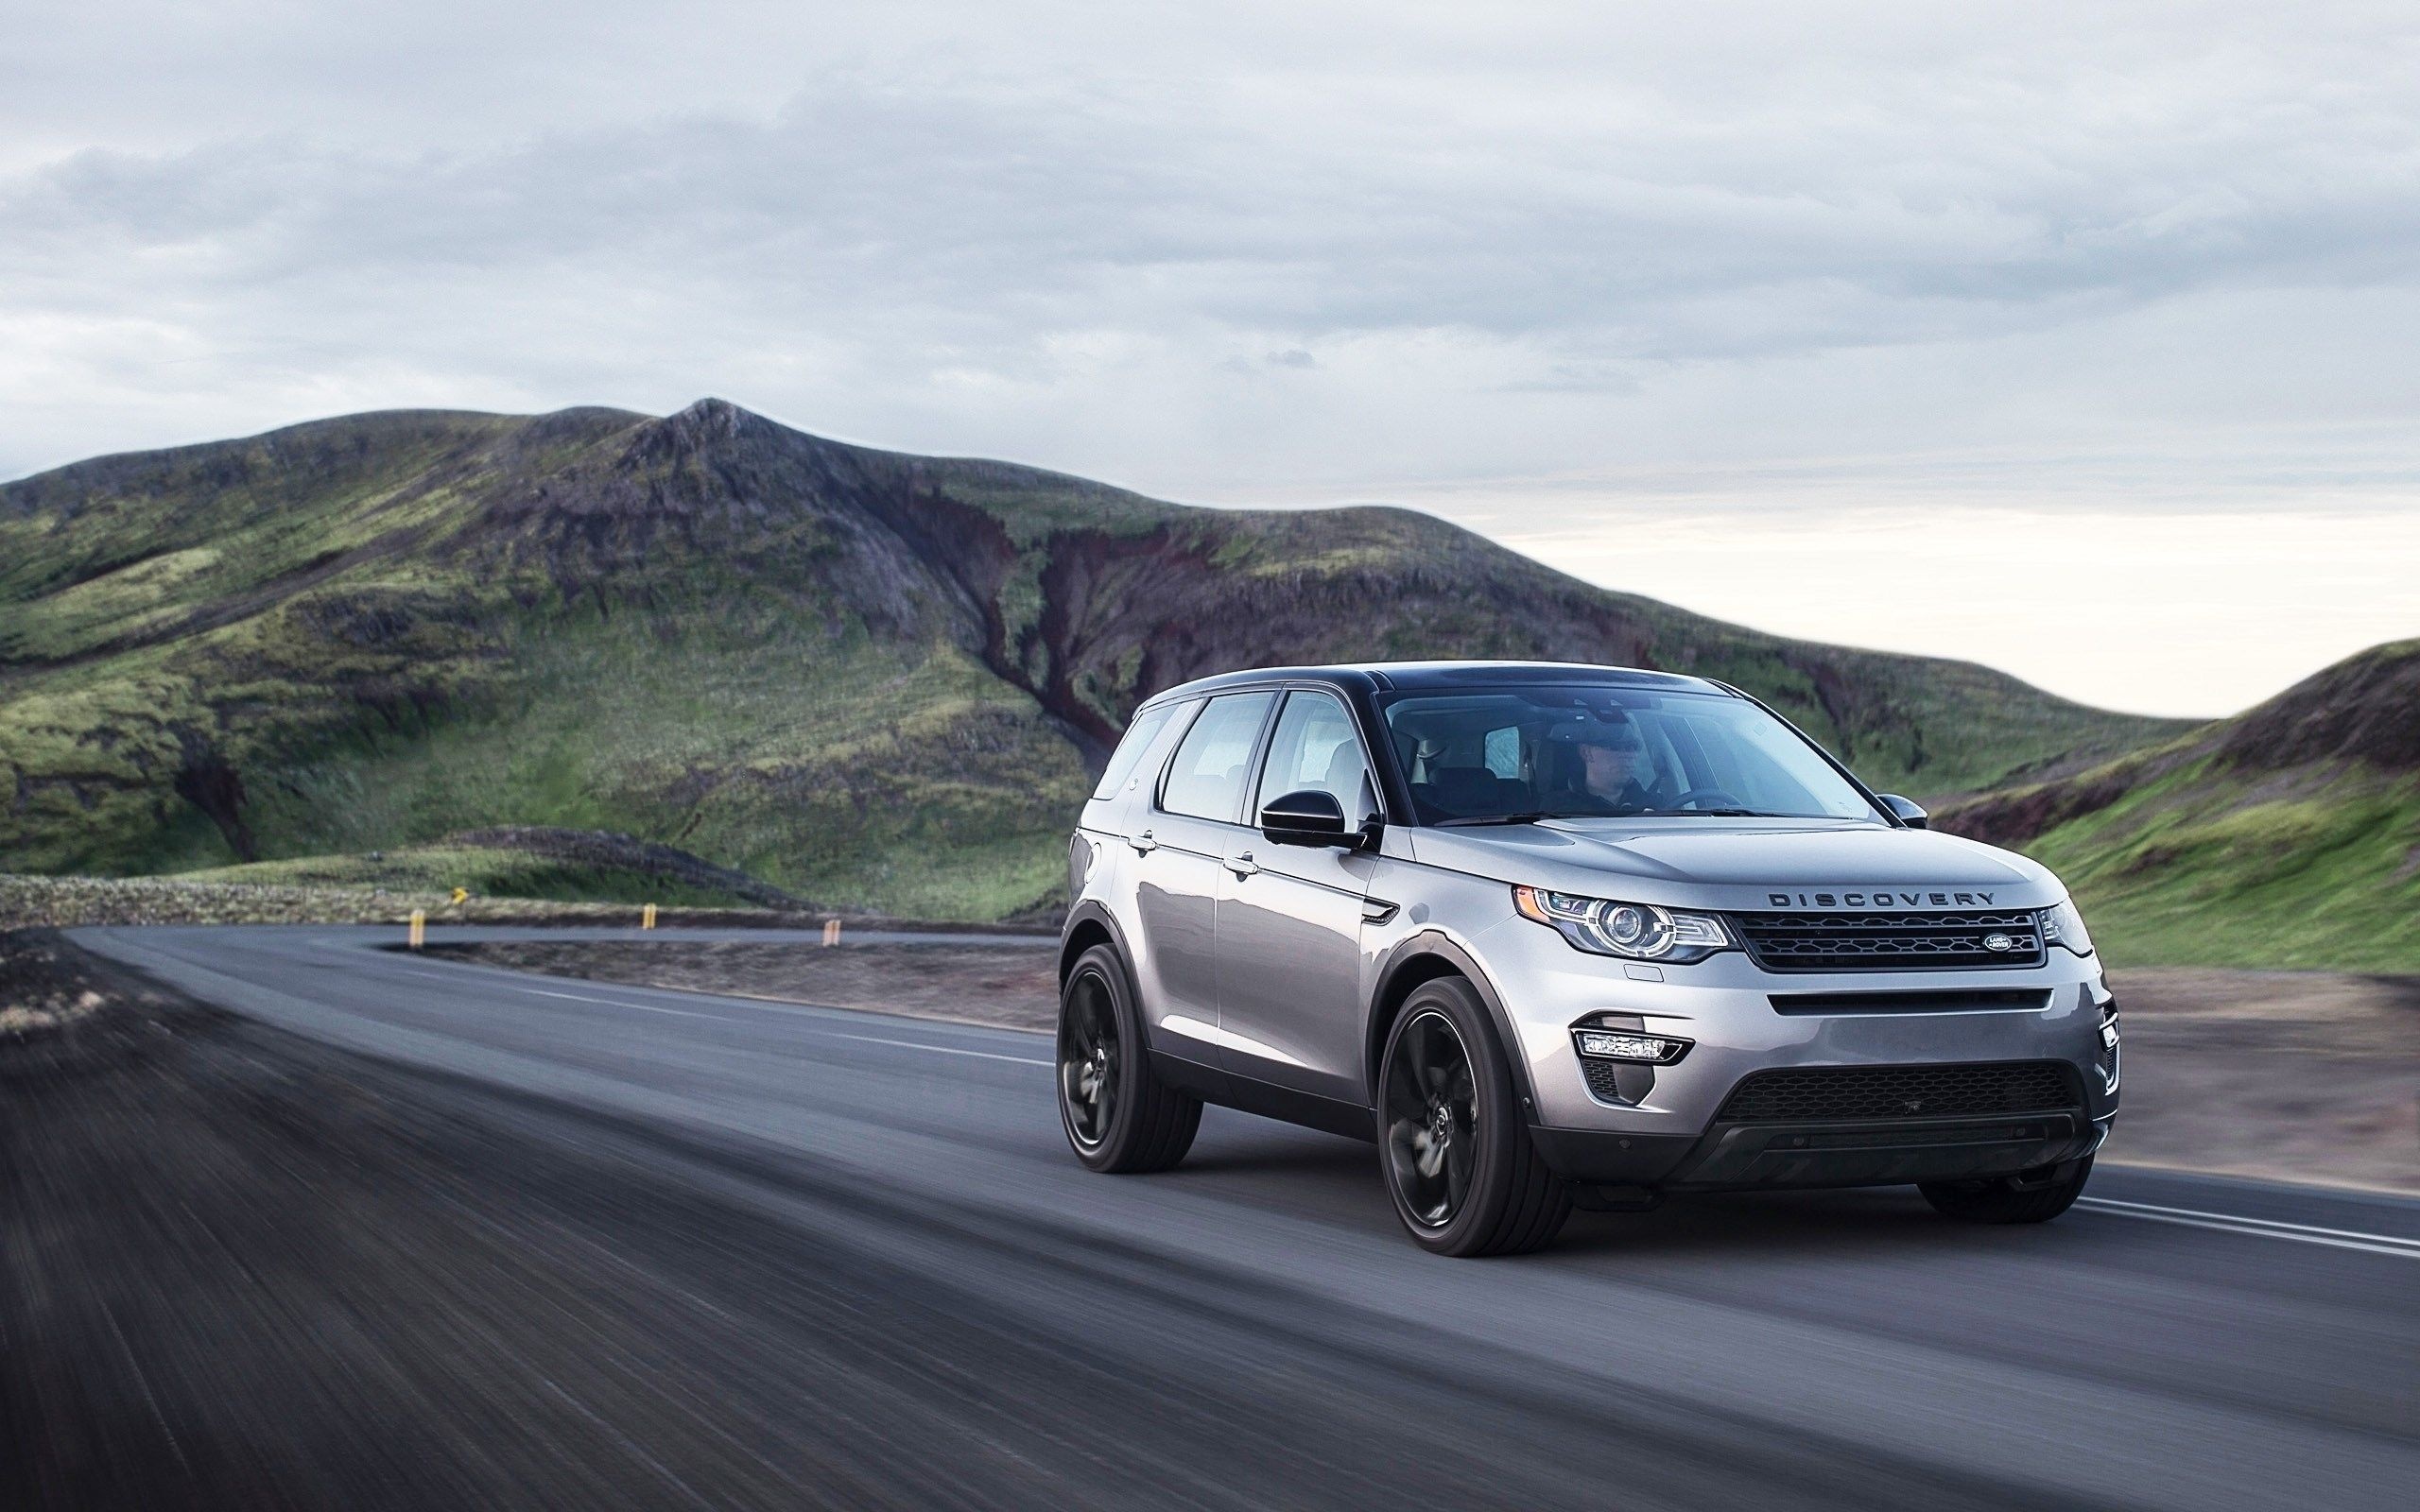 Land Rover Discovery, Discovery Sport, Top-quality wallpapers, 2560x1600 HD Desktop